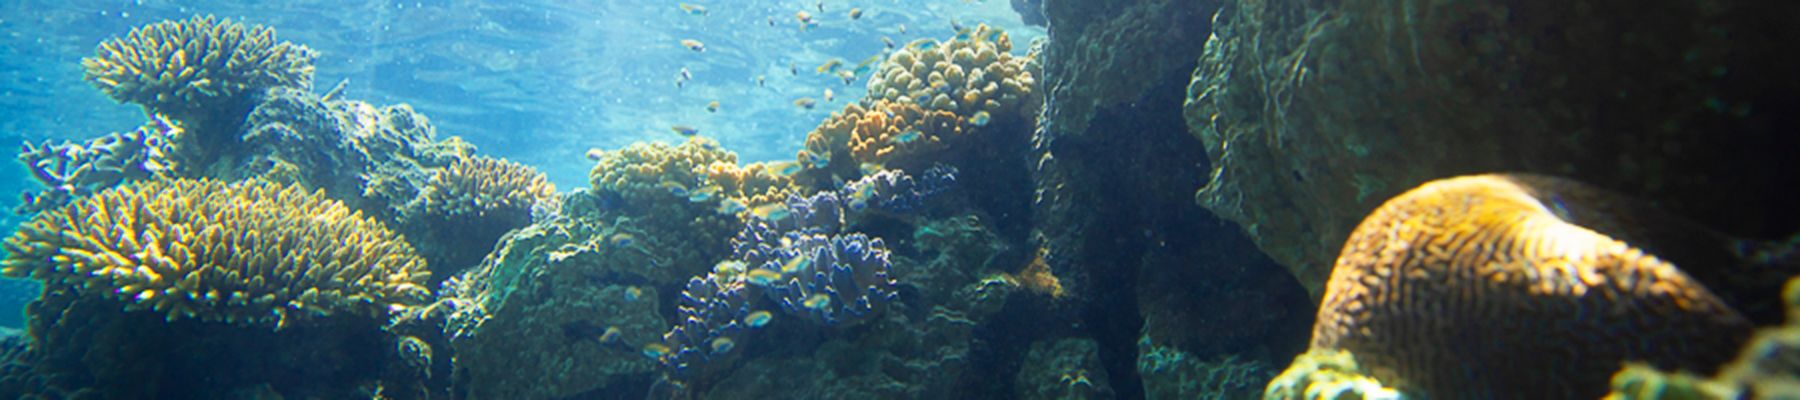 Whitsunday coral garden with golden, purple and blue corals